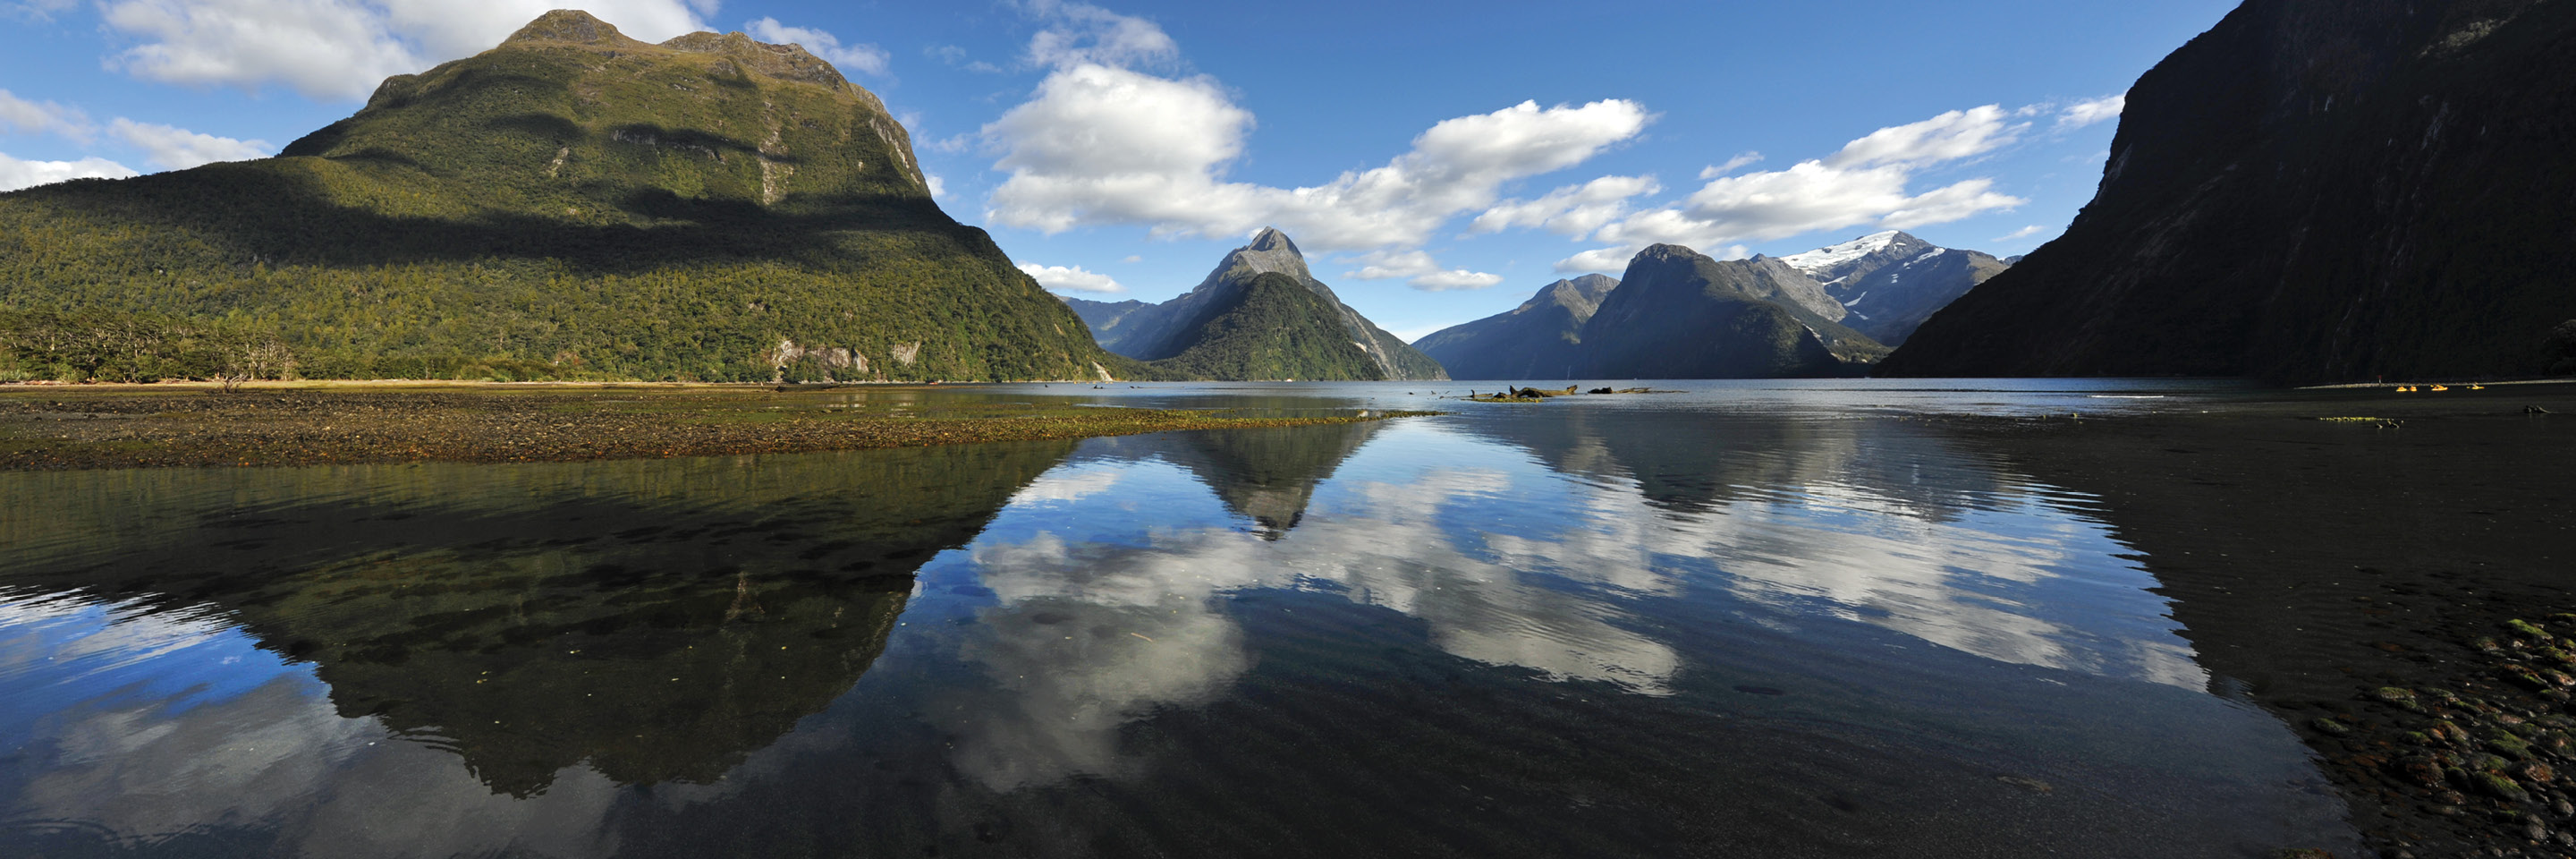 Independent Naturally New Zealand Globus® New Zealand Vacation Package